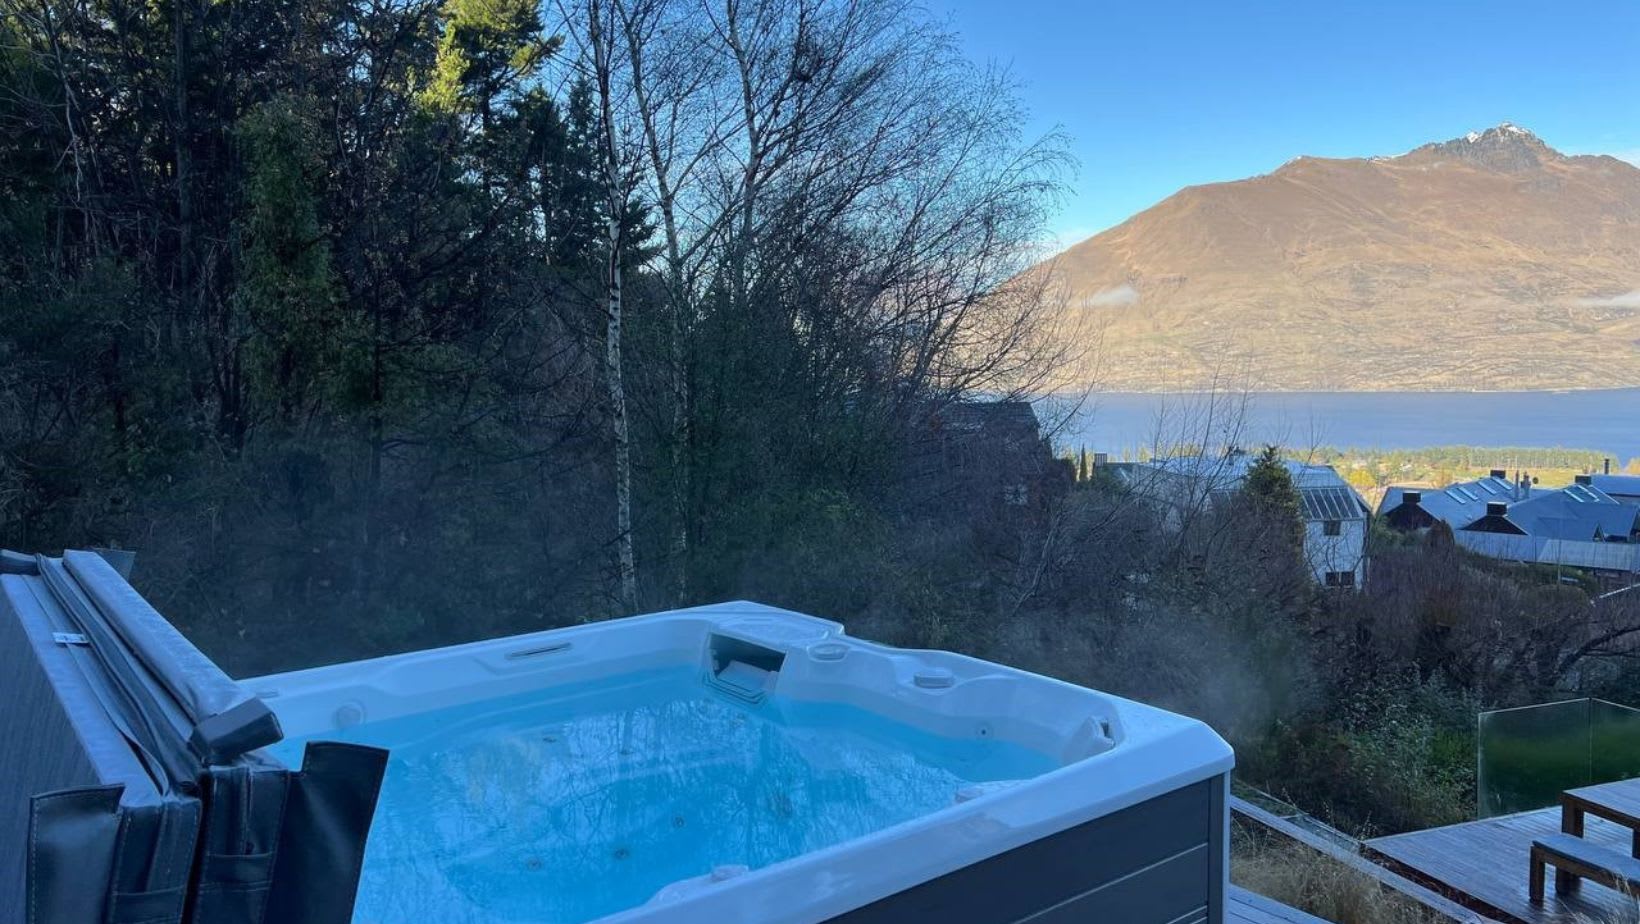 Unwinding in your private Queenstown spa